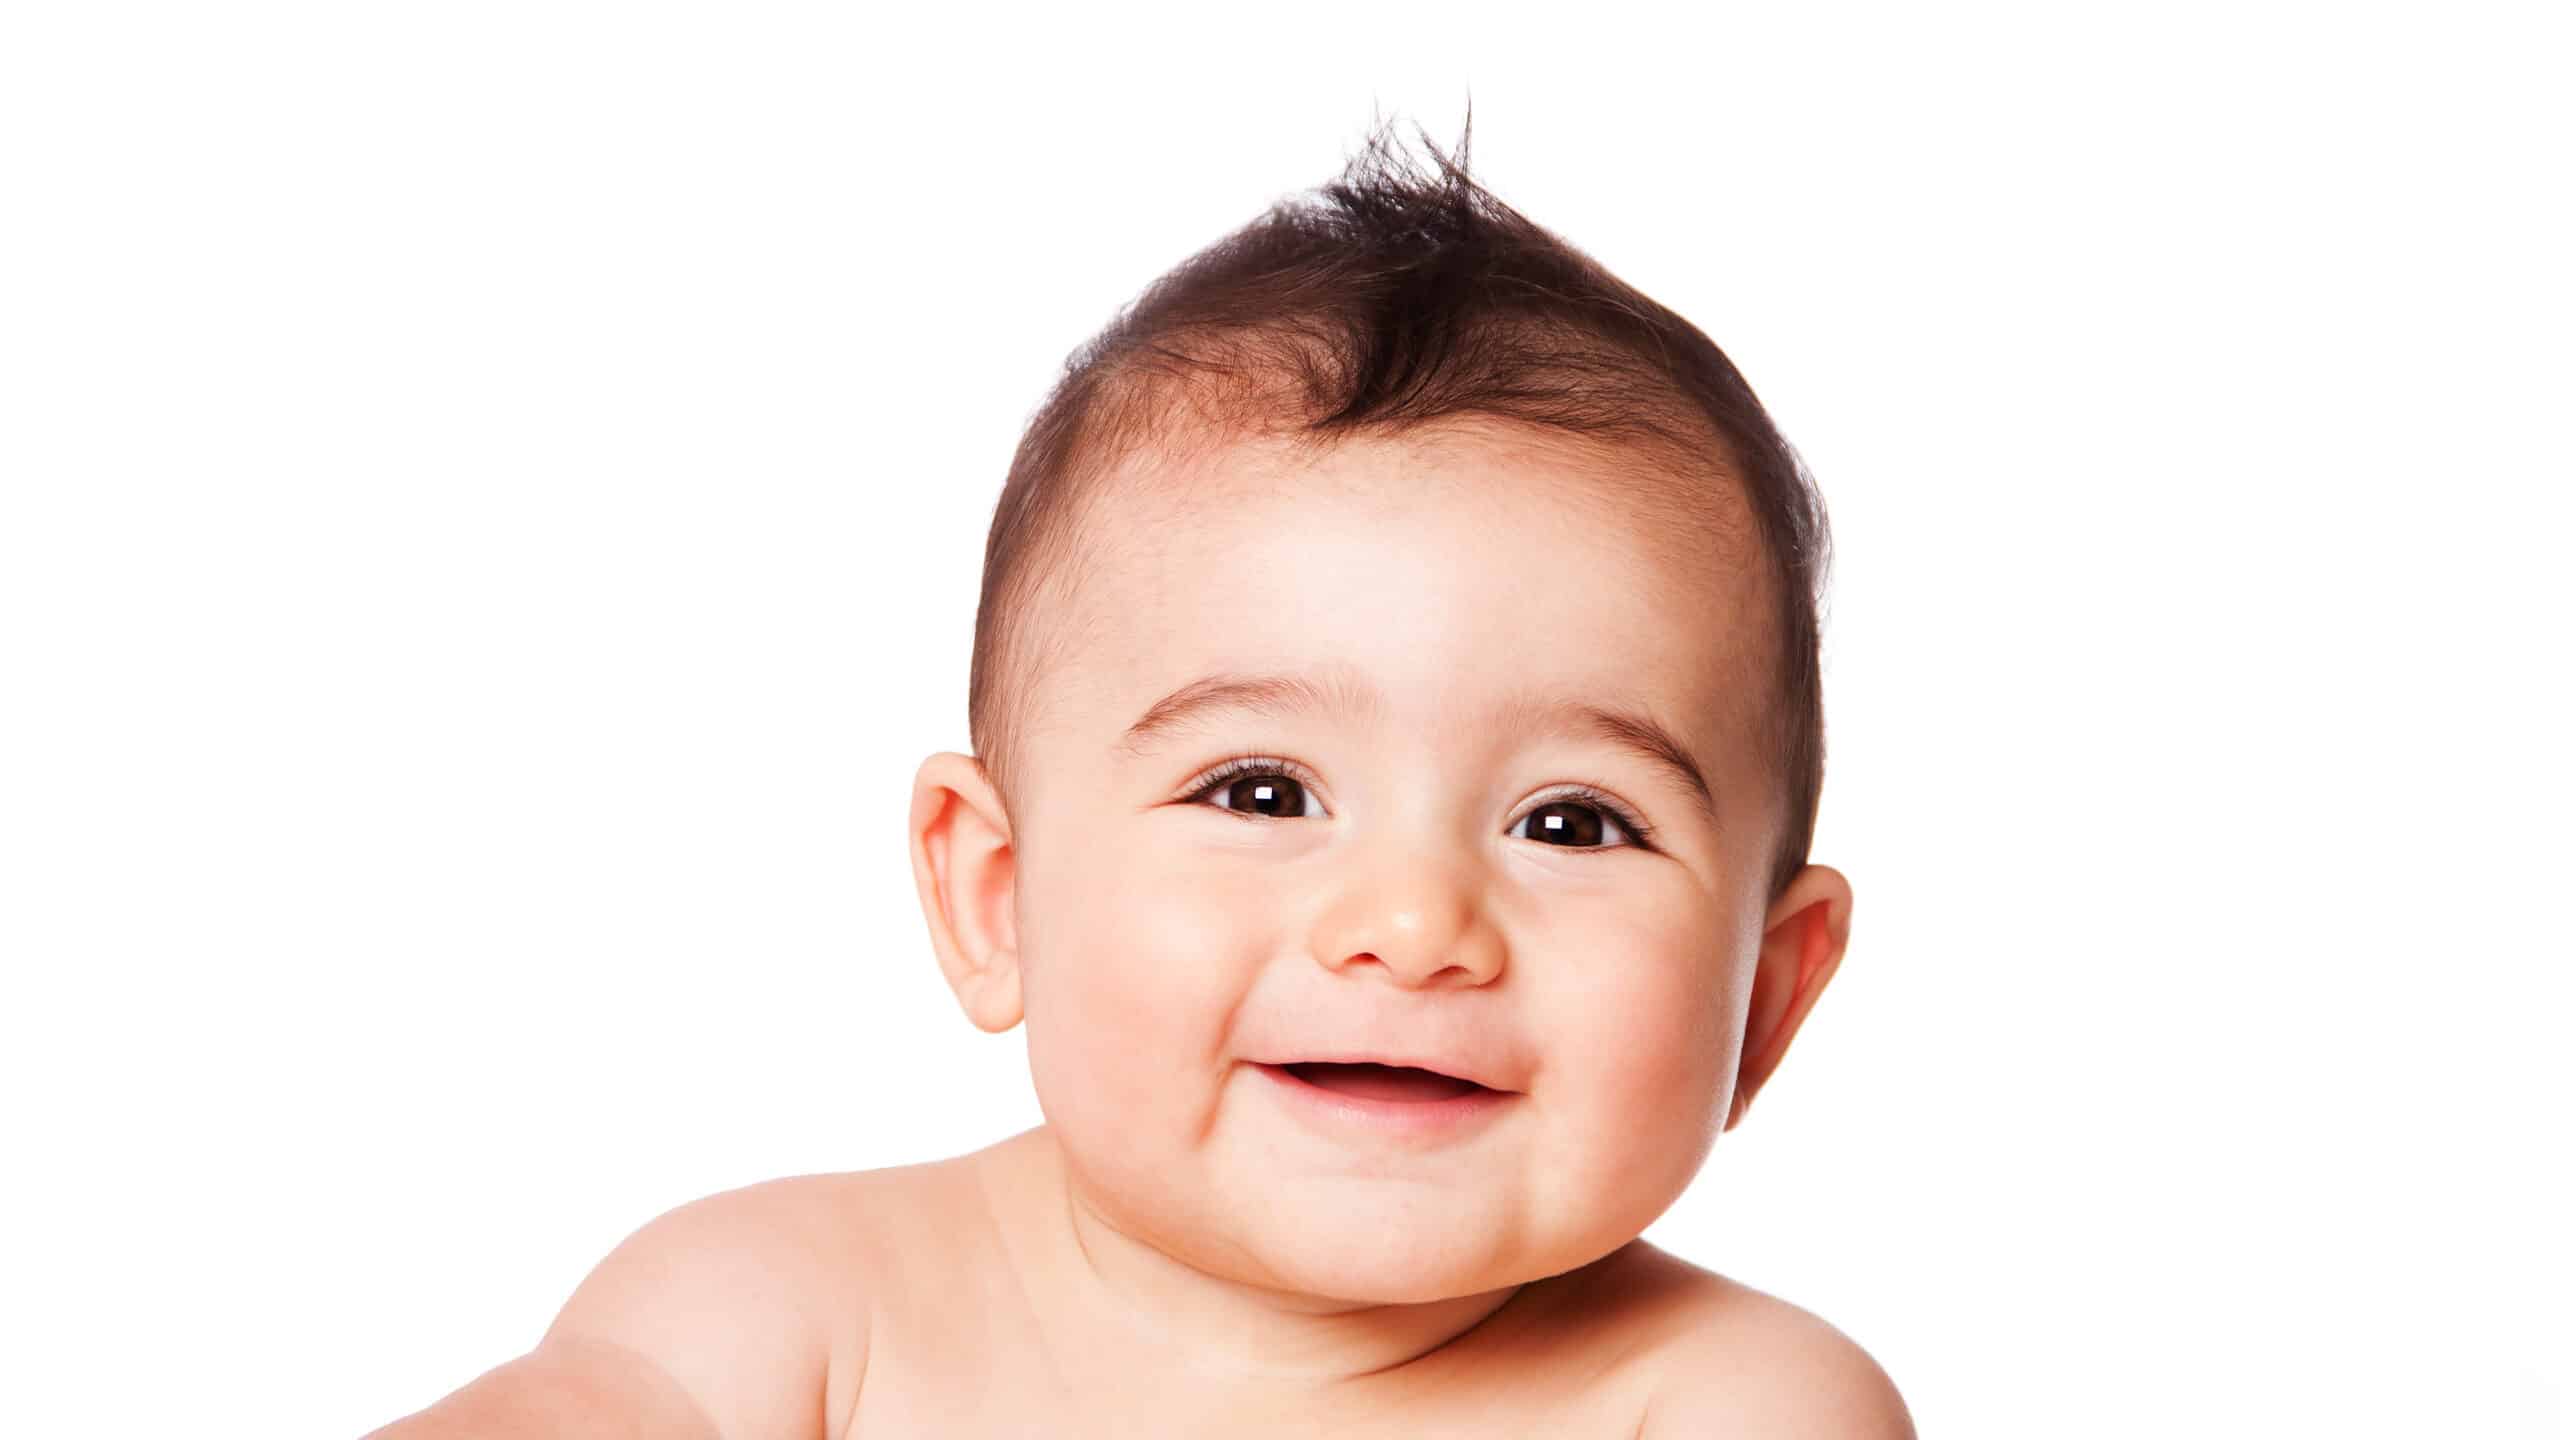 Beautiful expressive adorable happy cute laughing smiling baby infant face, isolated.